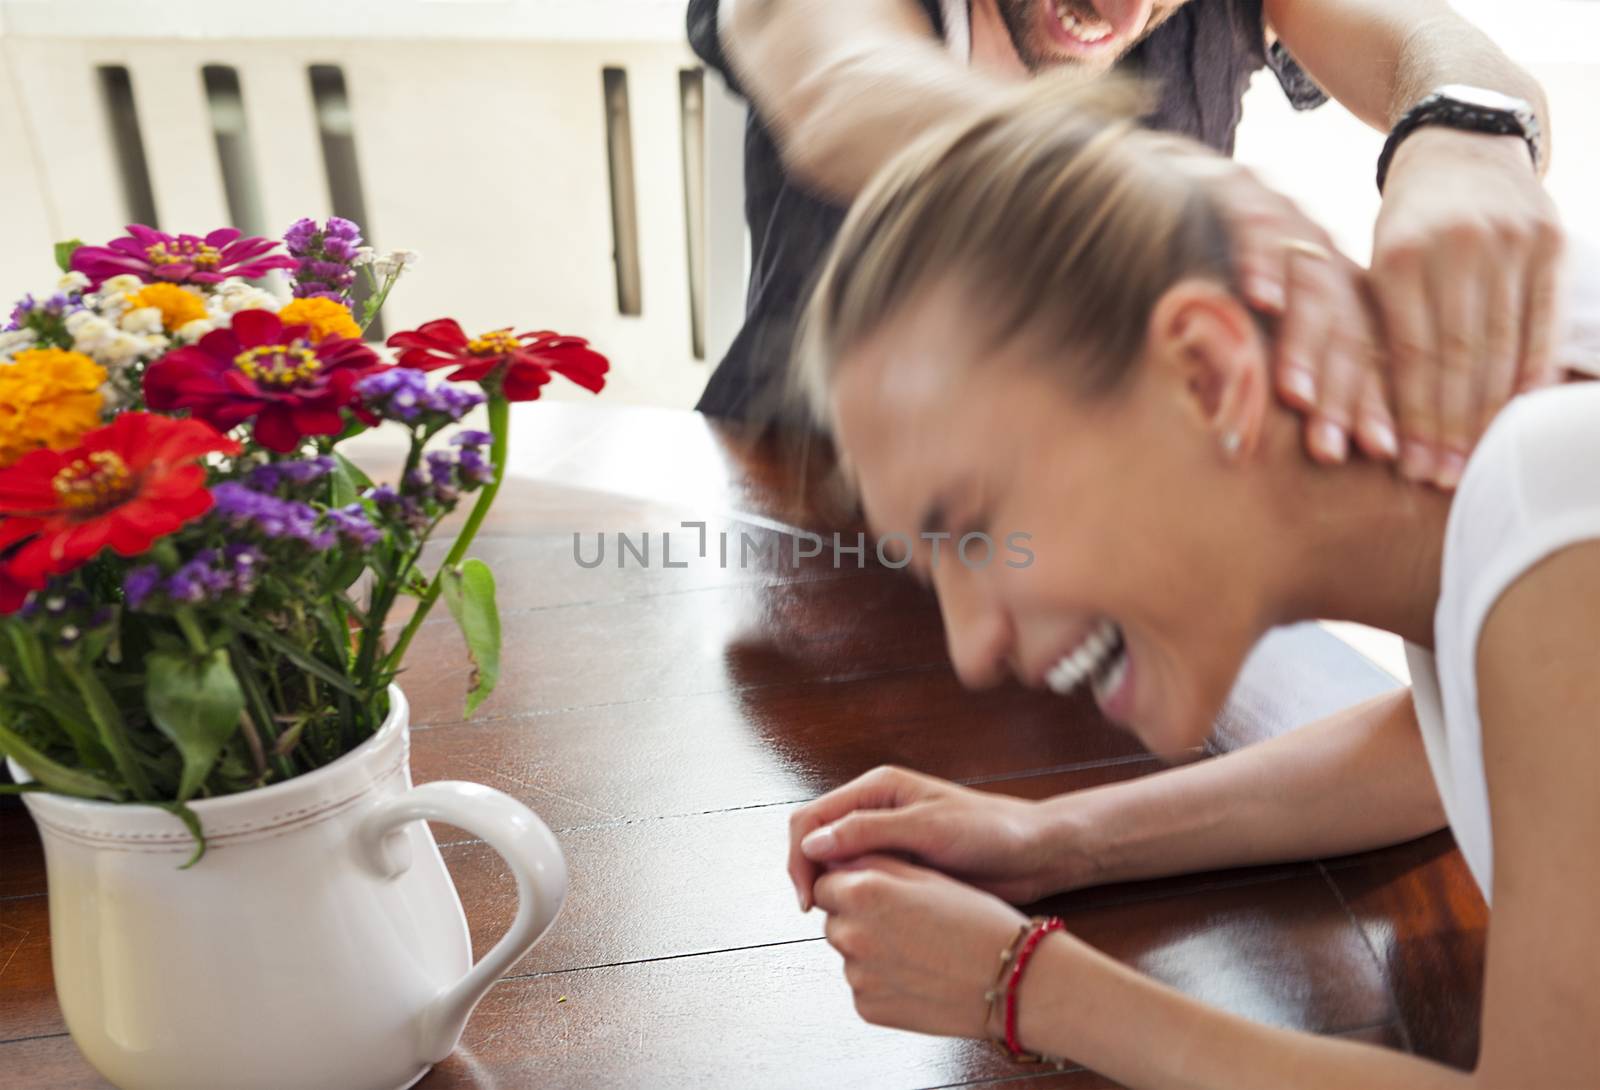 Motion blurred figures of playful young couple indoors. The man is squeezing the woman s neck. Female is laughing.